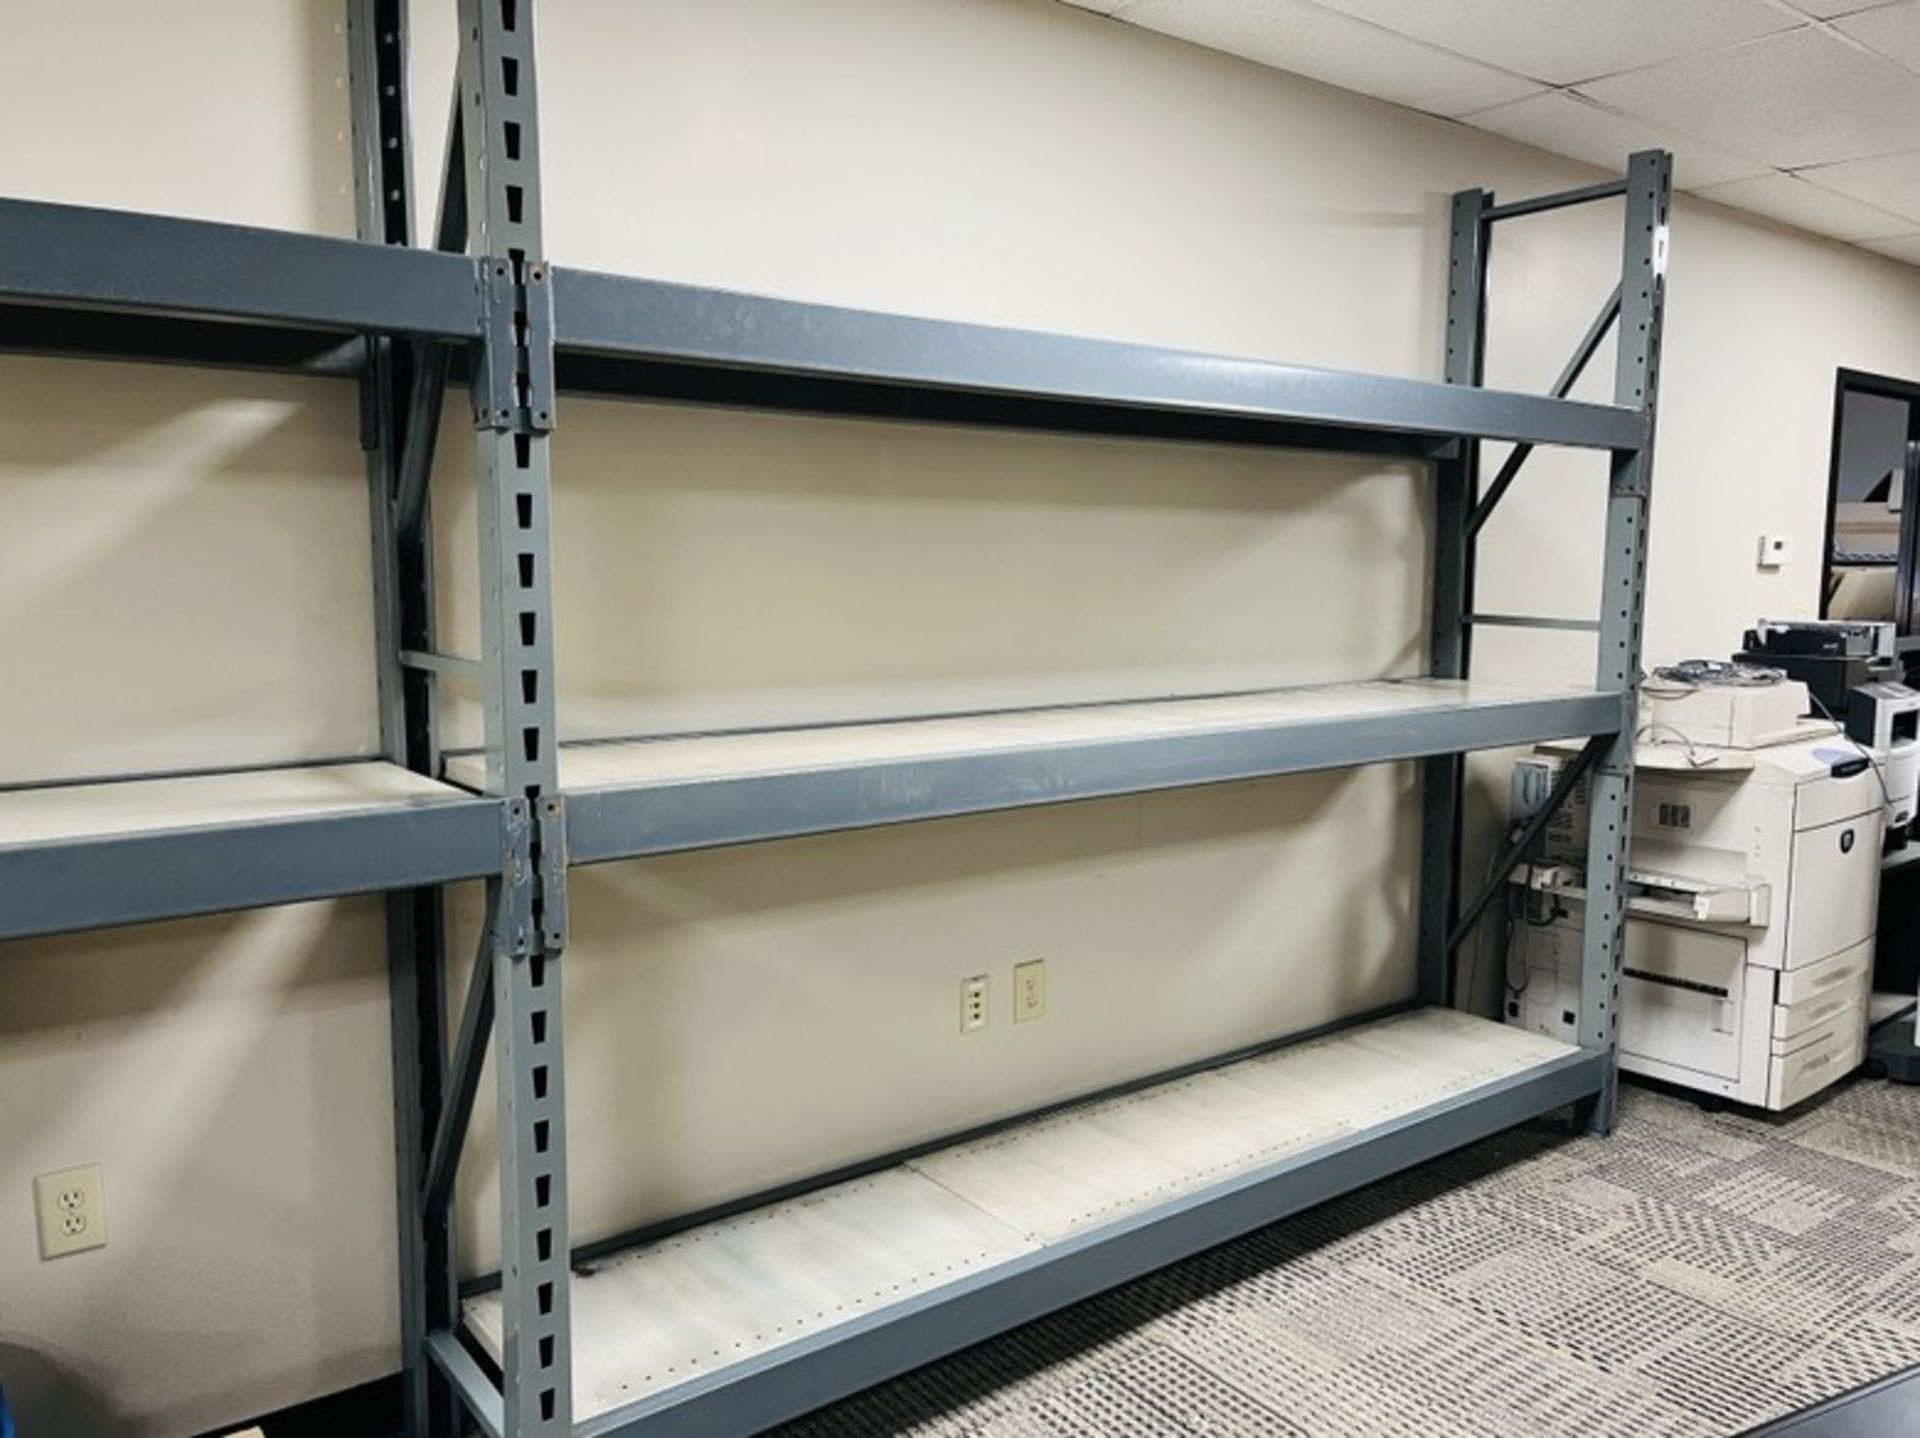 5 SECTION OF RETAIL/MERCHANDISE PALLET RACK SHELVING 8'H X 21.5"D X 108"L WITH 3 SHELVES